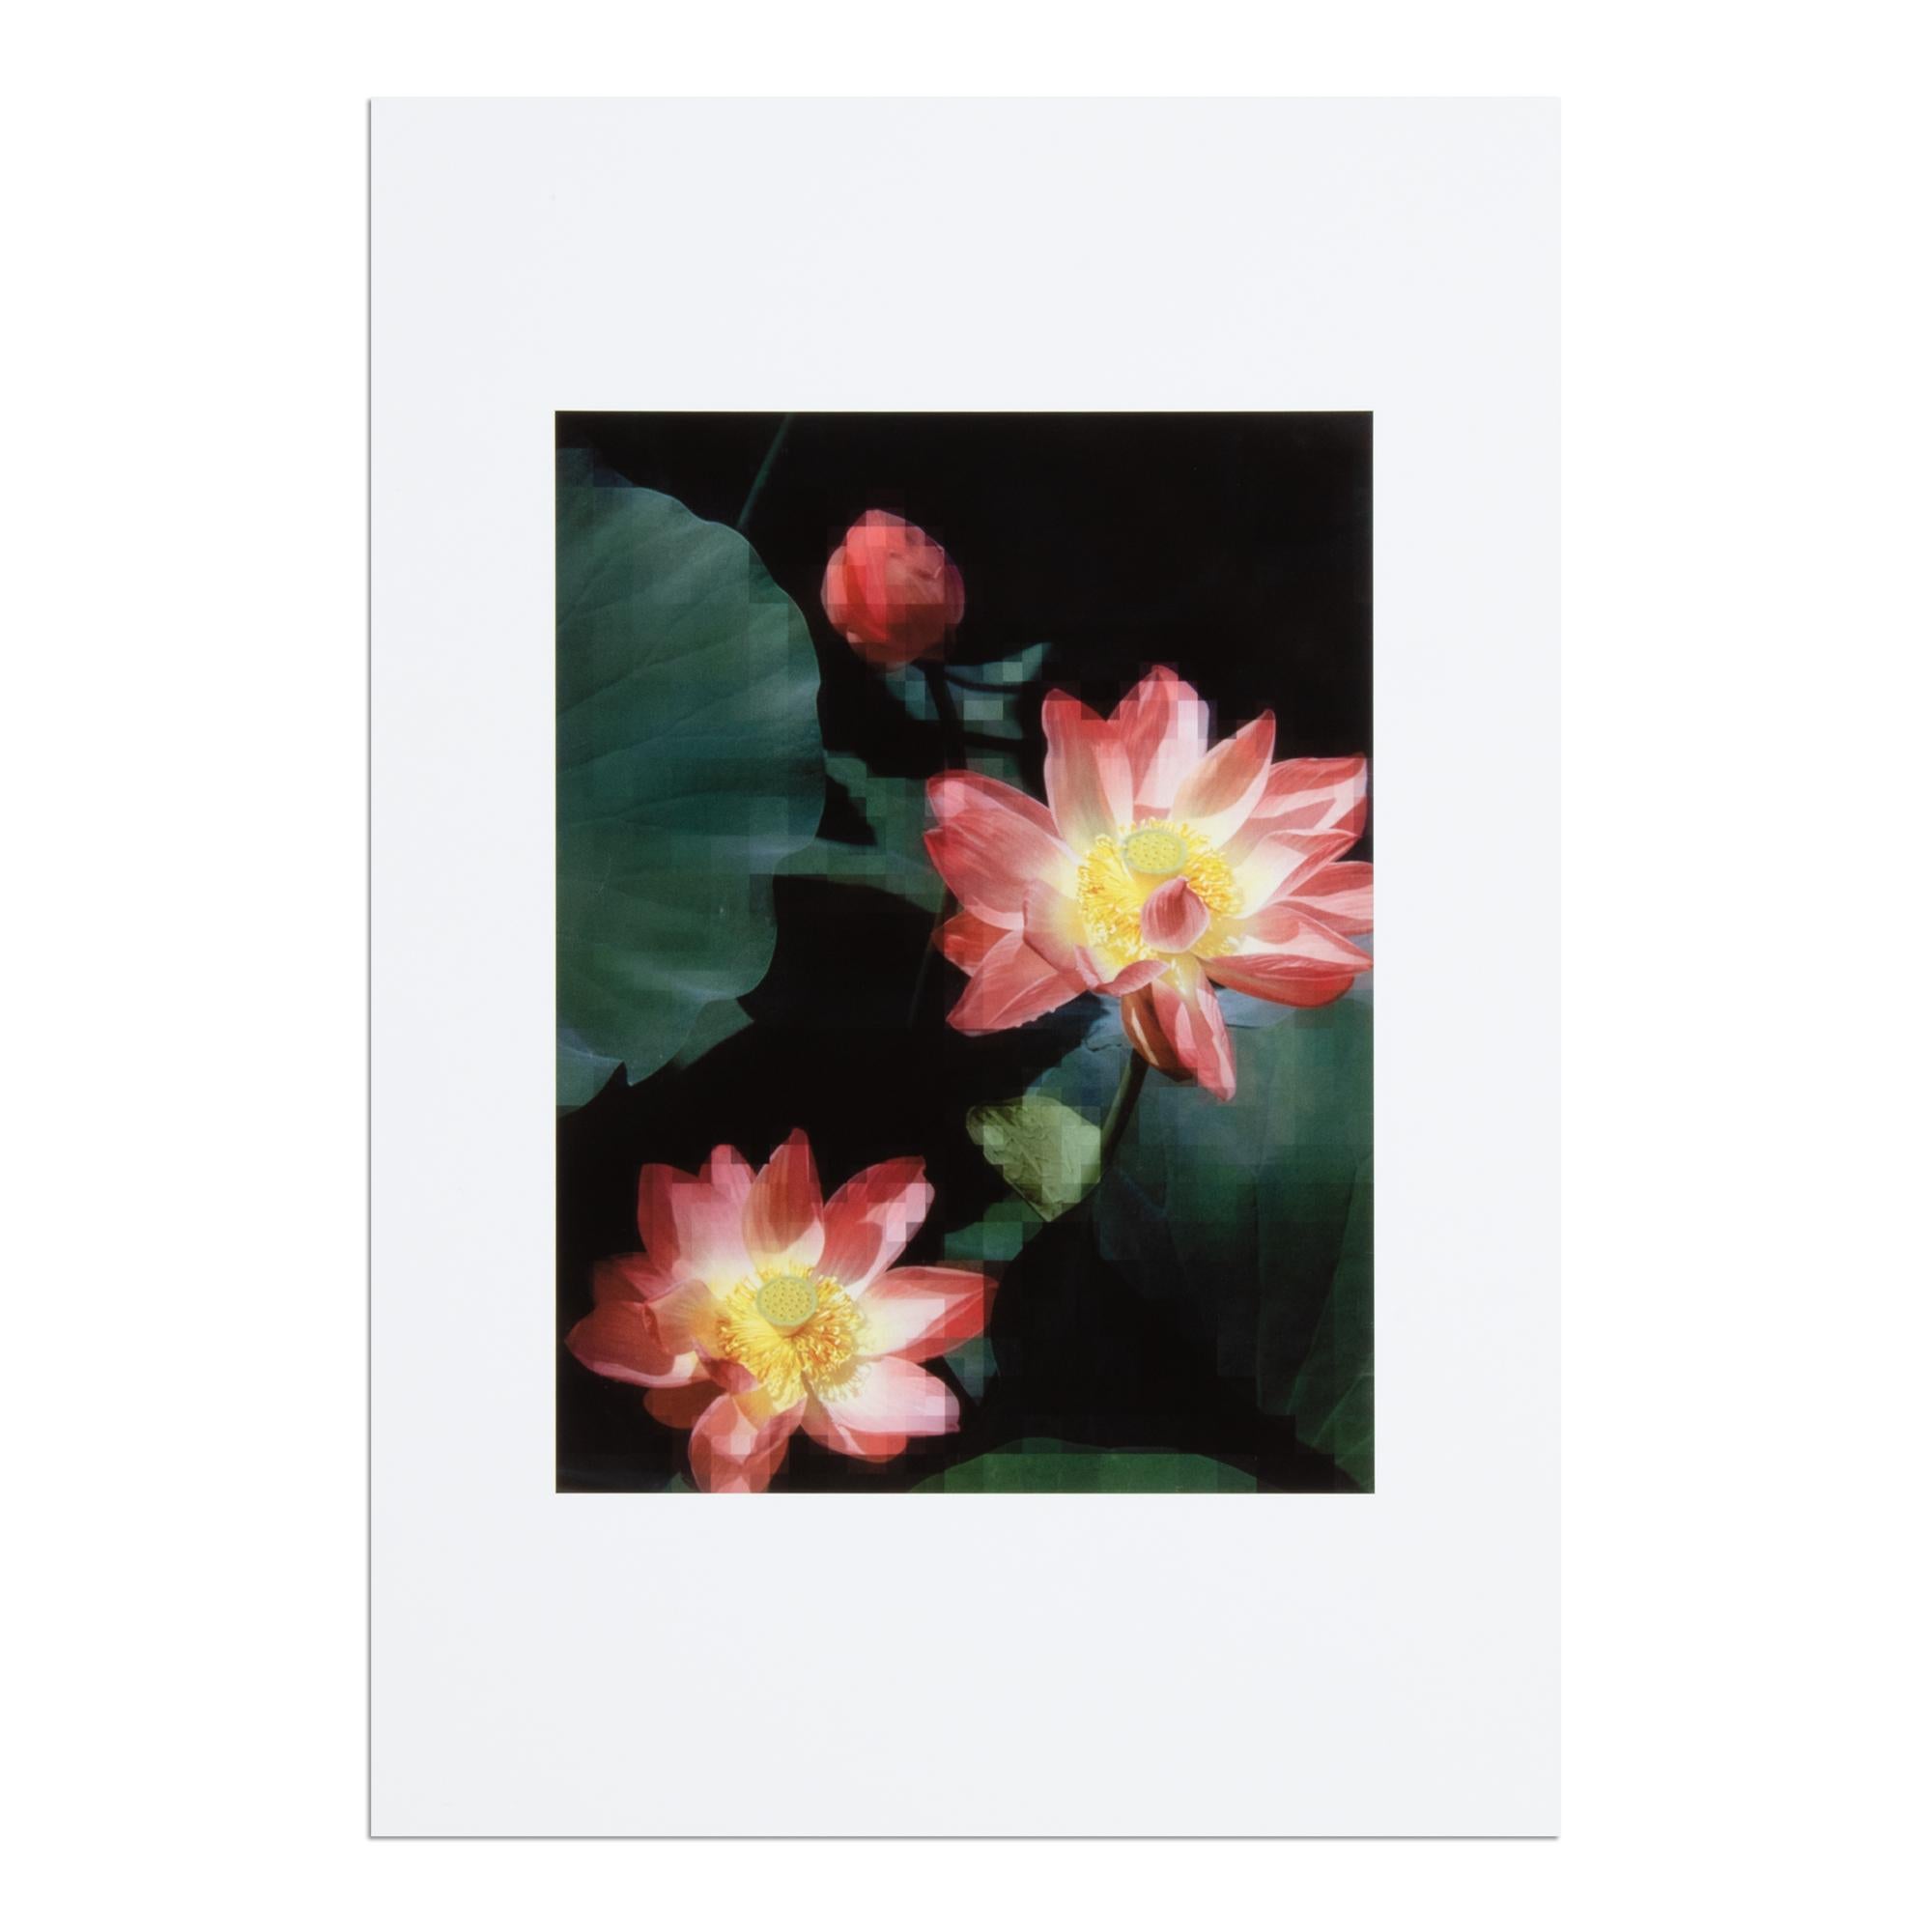 Thomas Ruff (German, b. 1958)
Seerose, 2022
Medium: Digital print on Epson Archival Matte paper
Dimensions: 48.3 x 32.9 cm
Edition of 50: Hand-signed and numbered
Condition: Mint